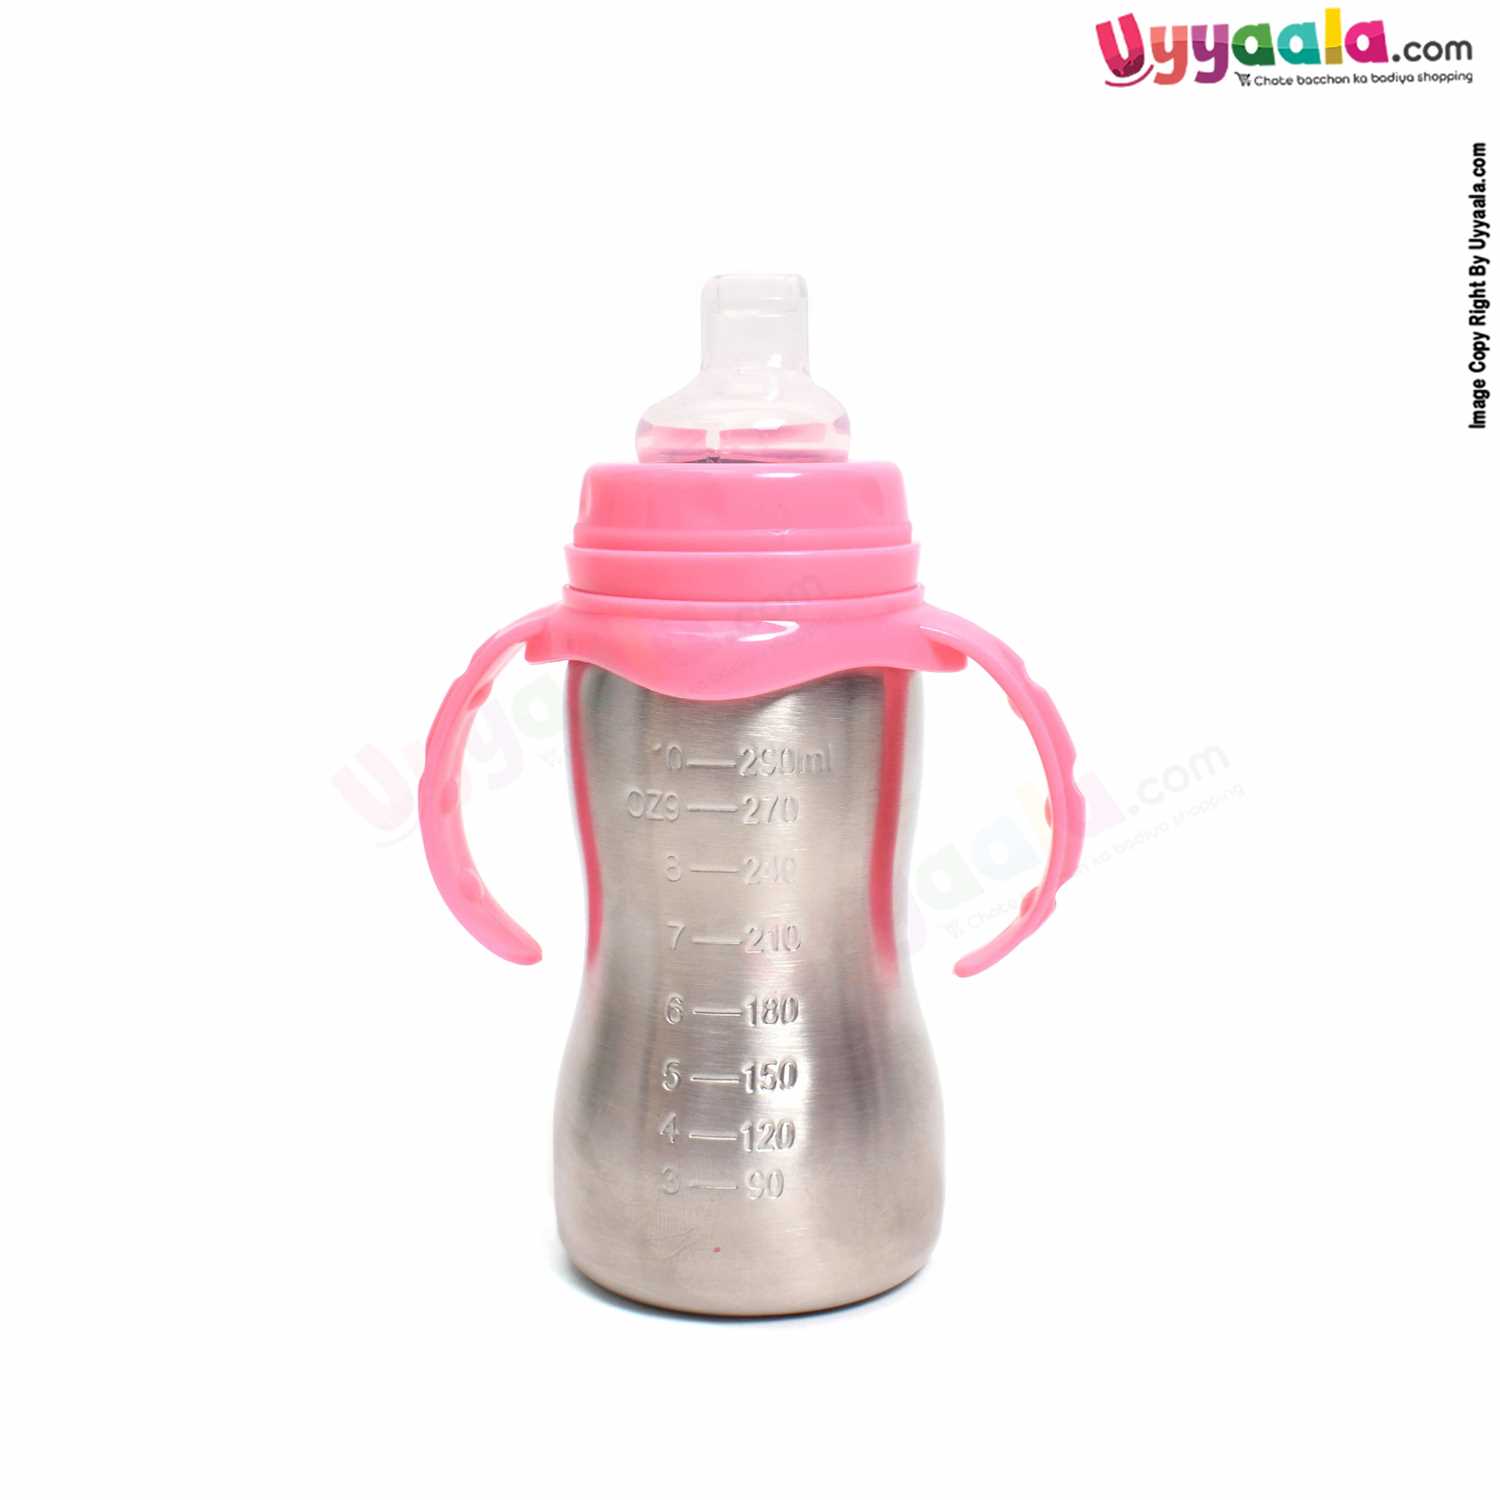 MASTELA Stainless Steel Twin Handle Feeding Baby Bottle Cum Sipper with Two Nipples 290ml - Silver